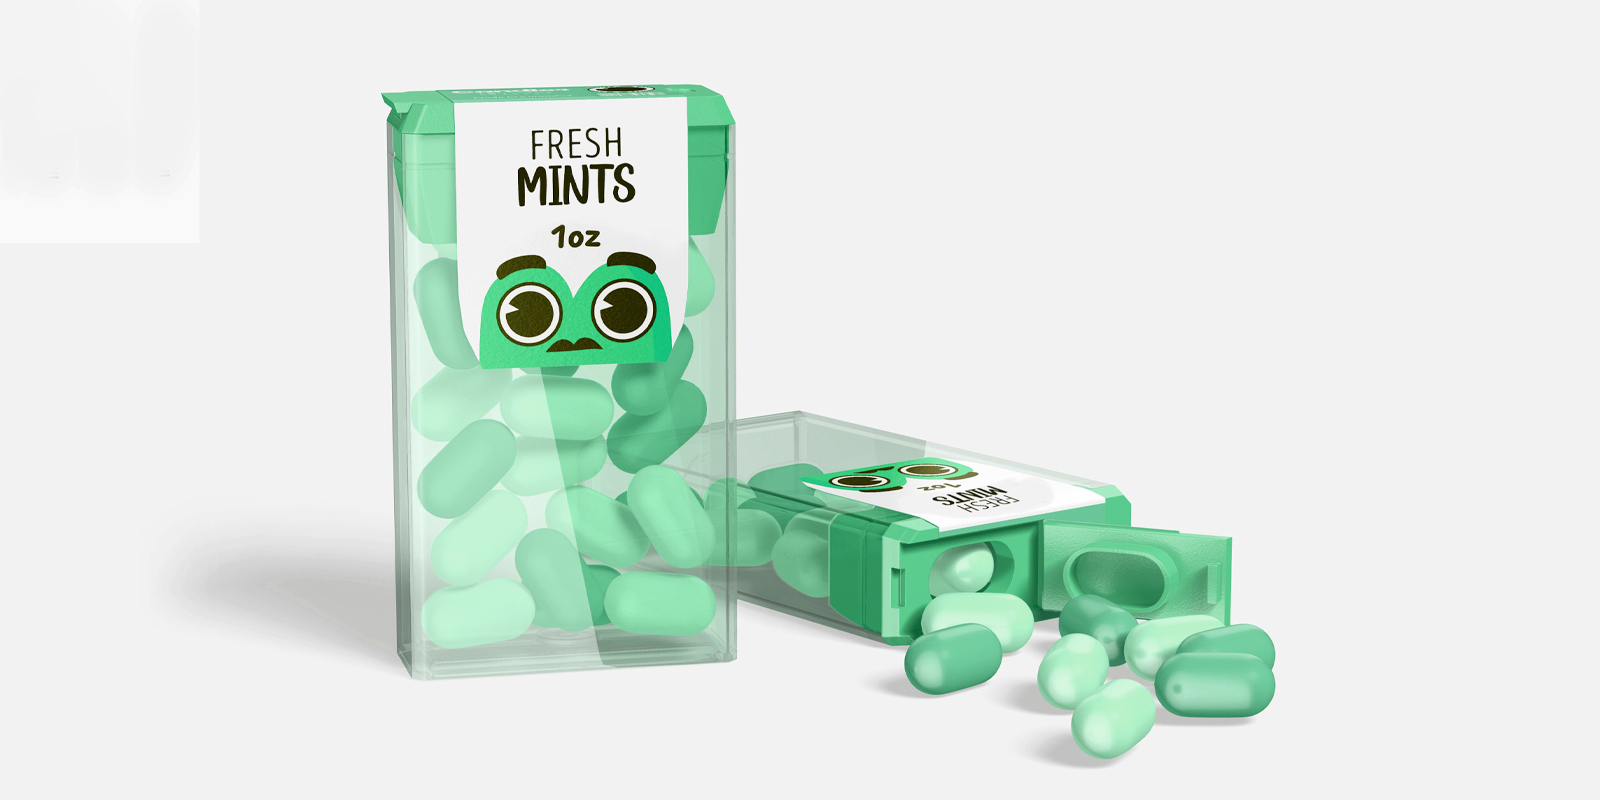 Mints in Brisbane - Print with Pagerr